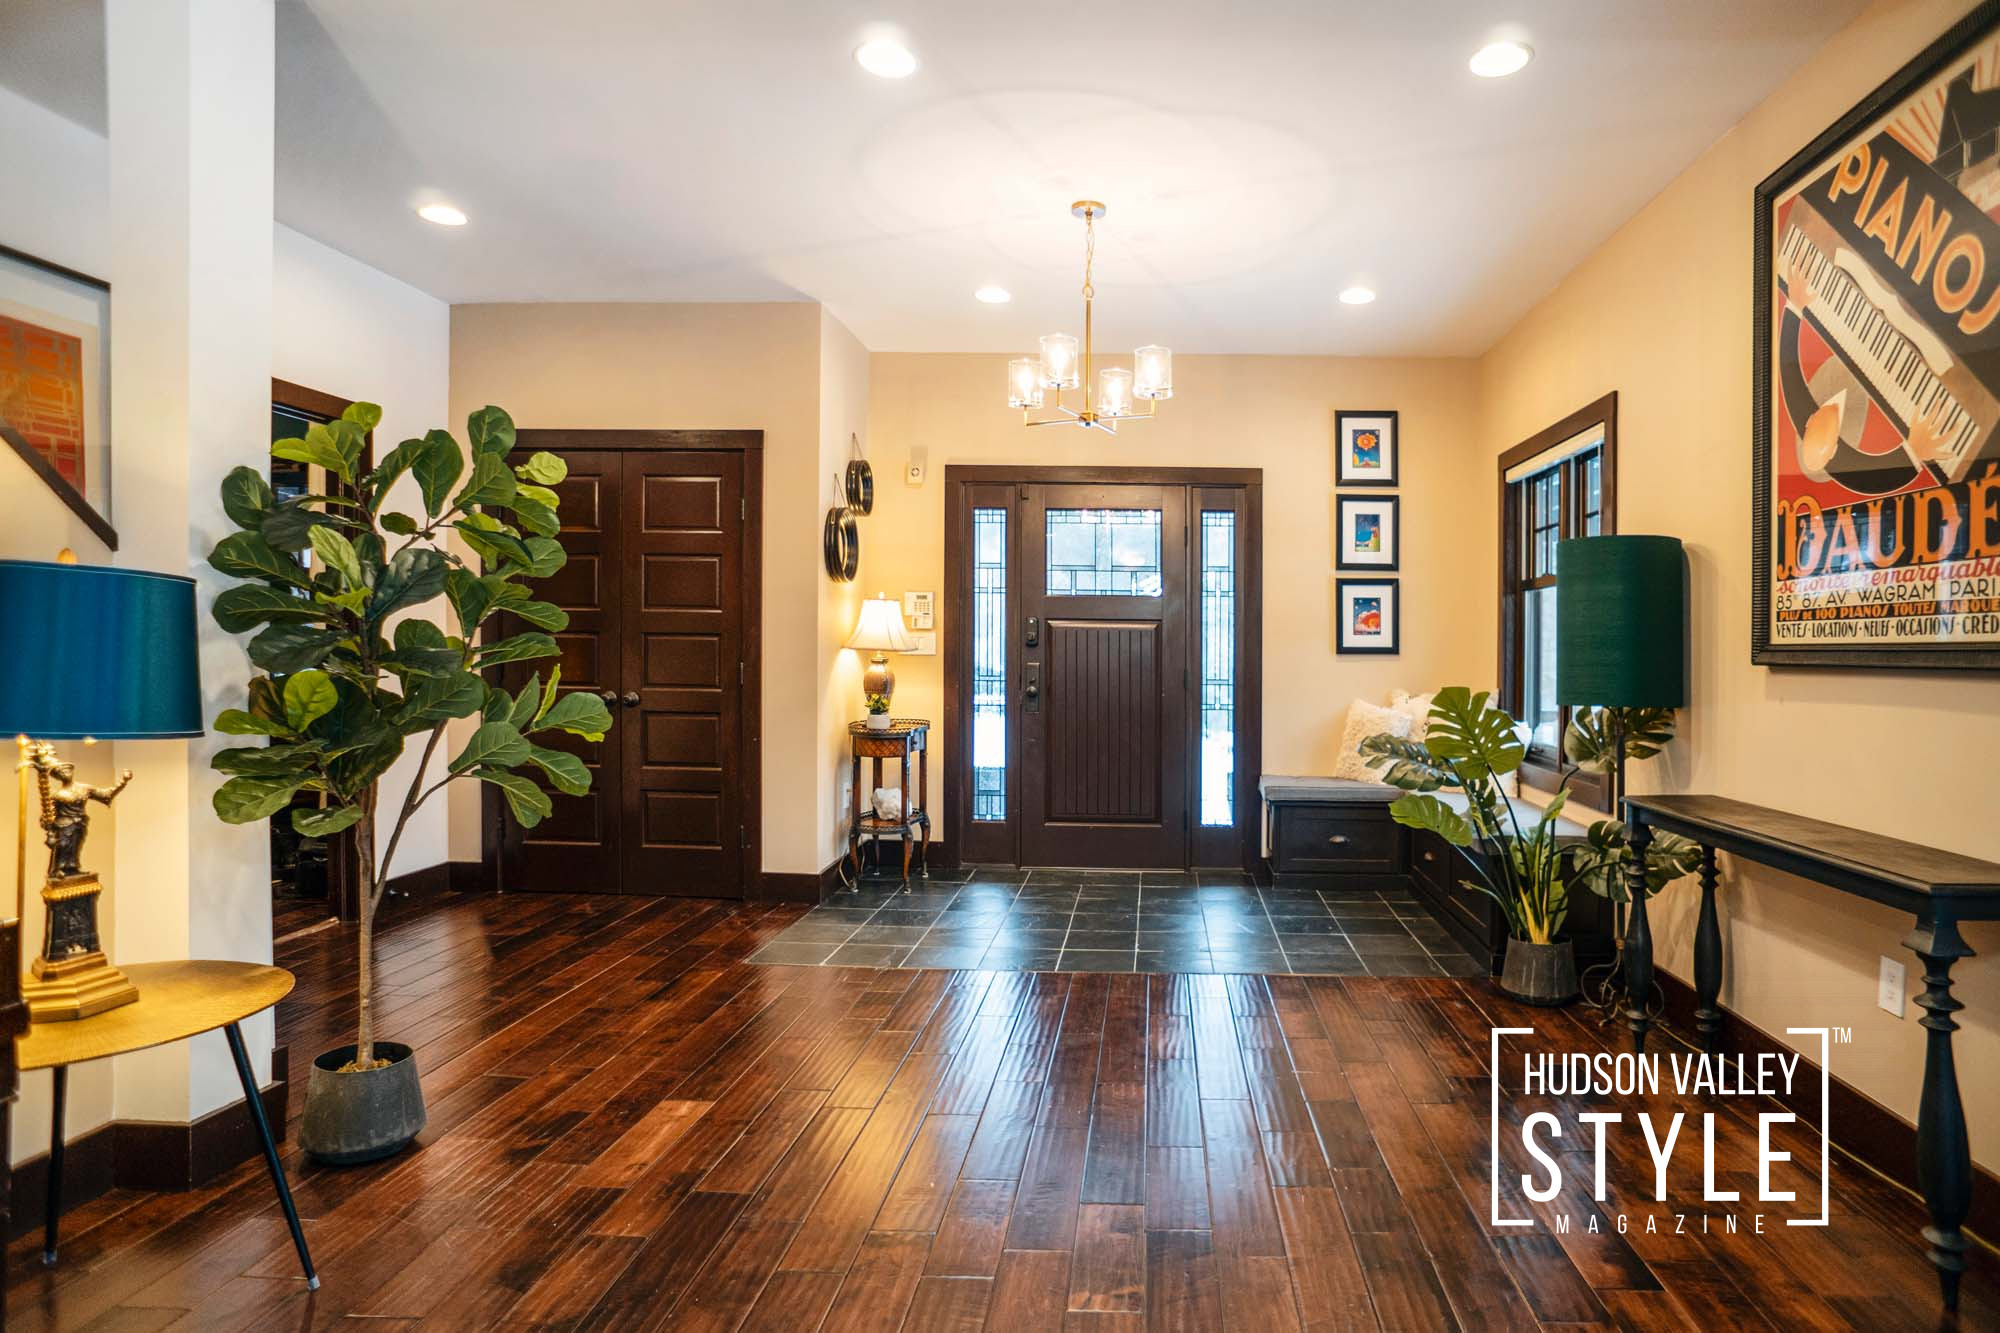 Considering buying a house in the Catskill Mountains or Hudson Valley? – Featured Hudson Valley Home for Sale in Catskill, NY – Real Estate Photography by Alluvion Media